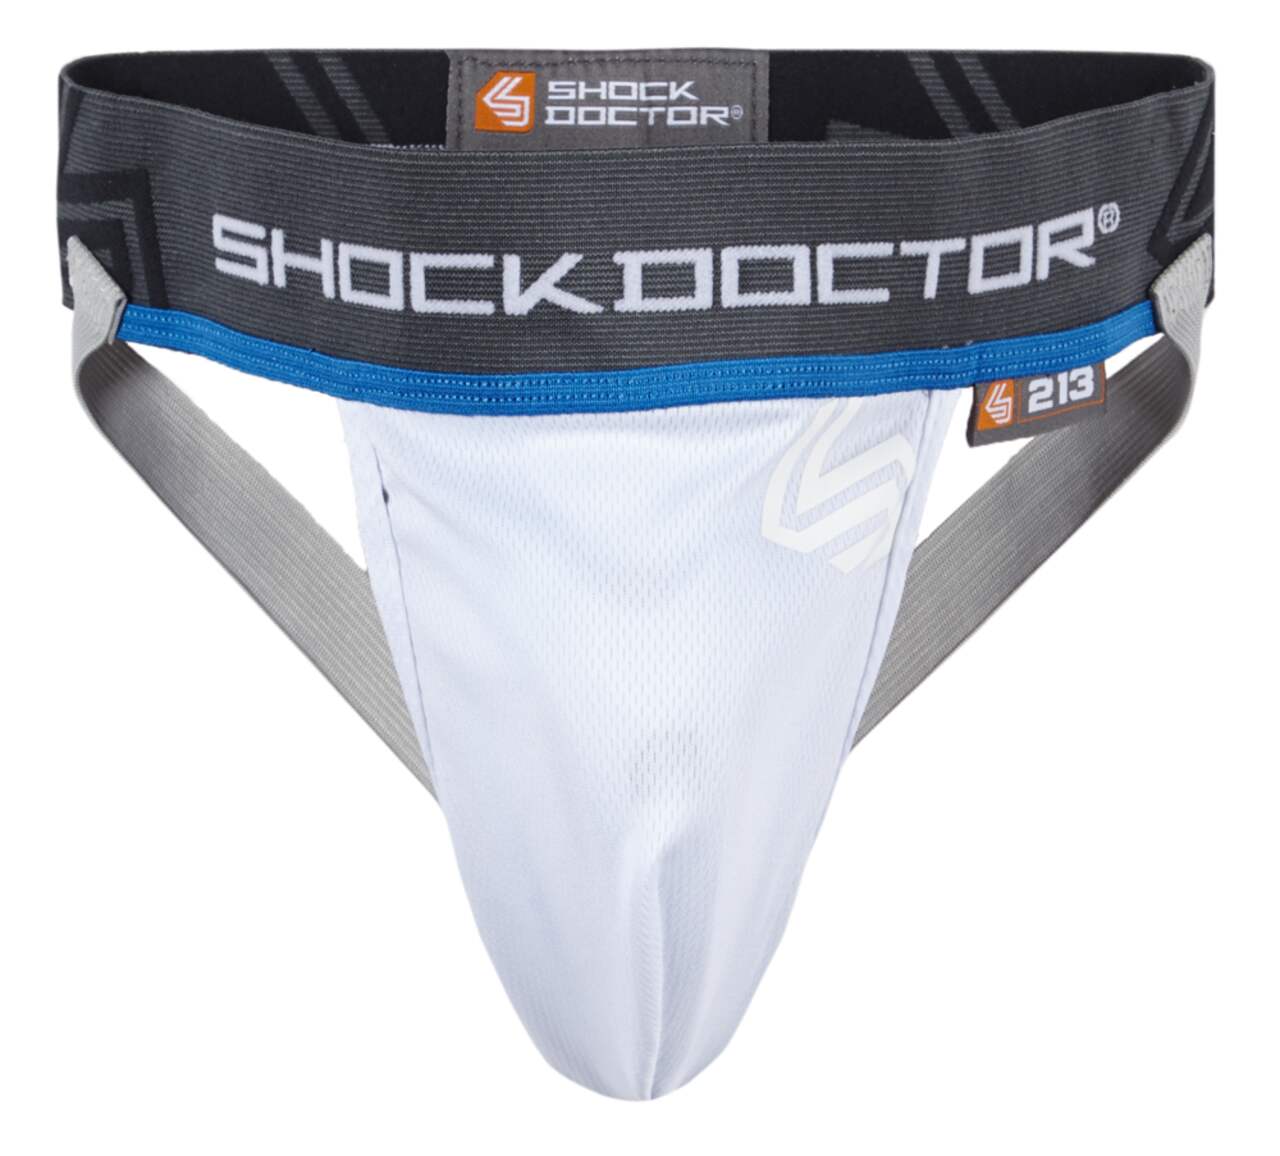 Shock Doctor Compression Shorts Groin Cup Combo Black Canada